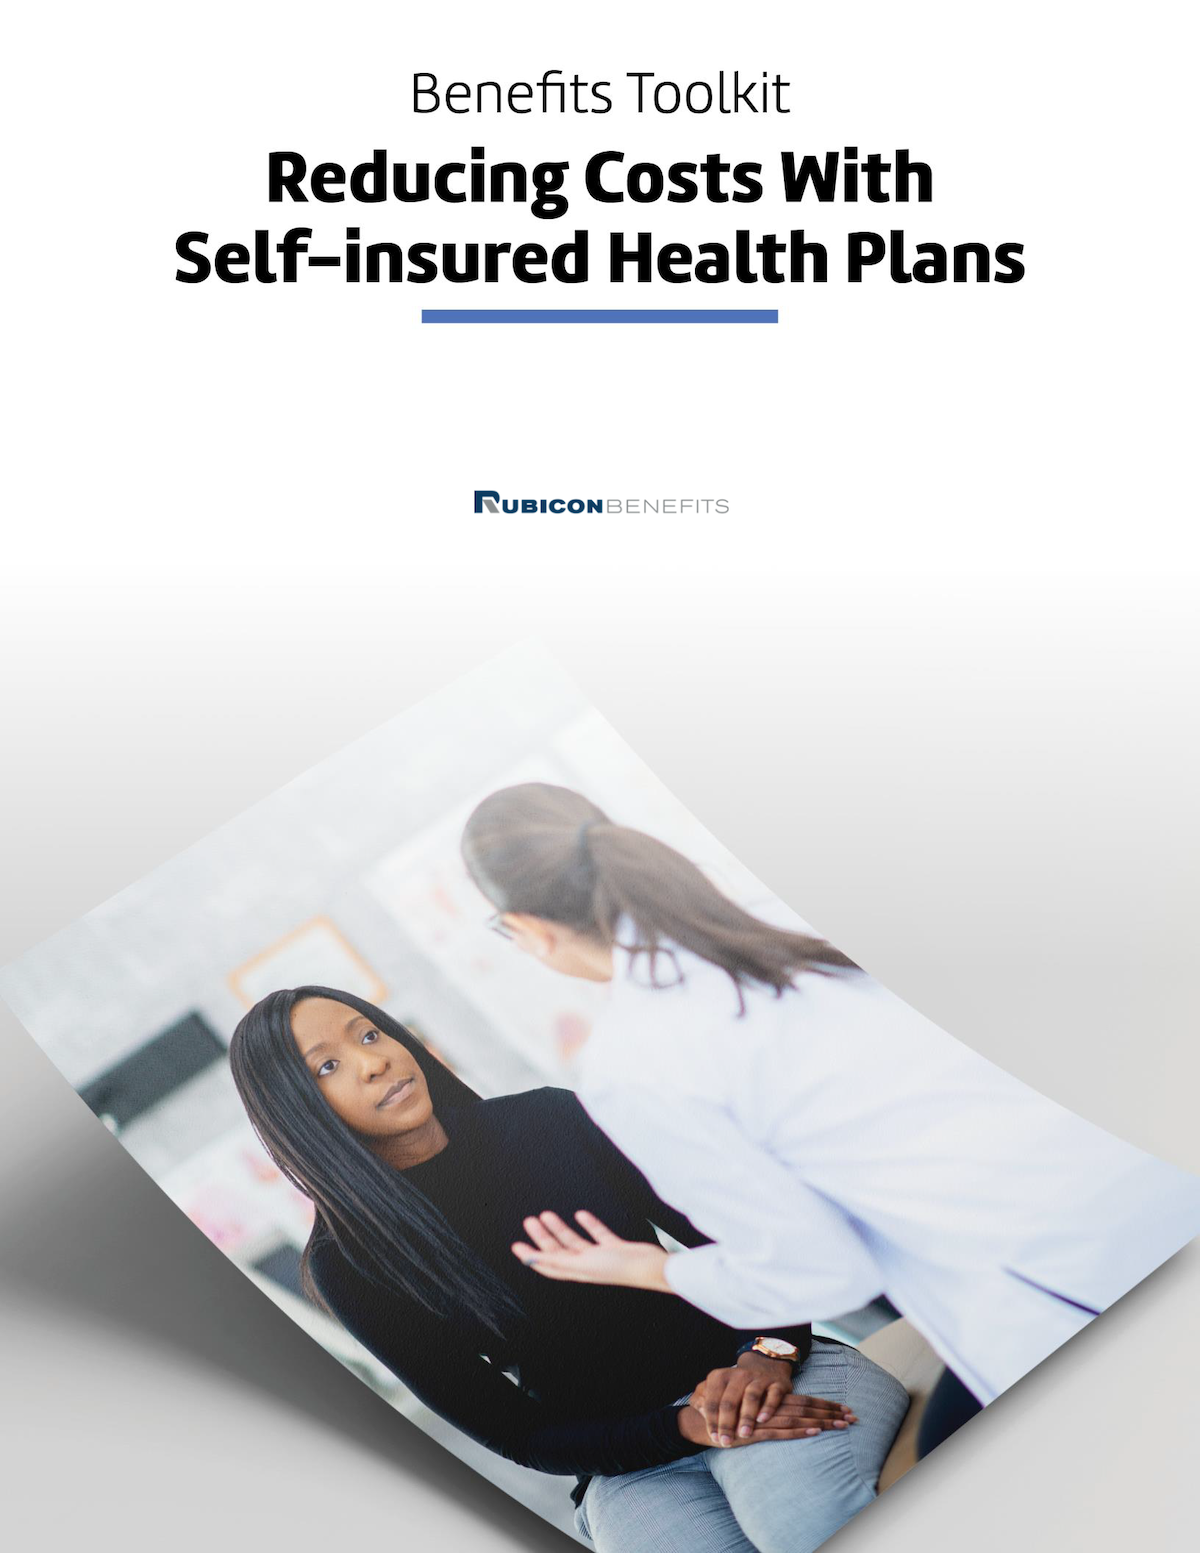 Benefits Toolkit - Reducing Costs with Self-insured Health Plans_Page_01